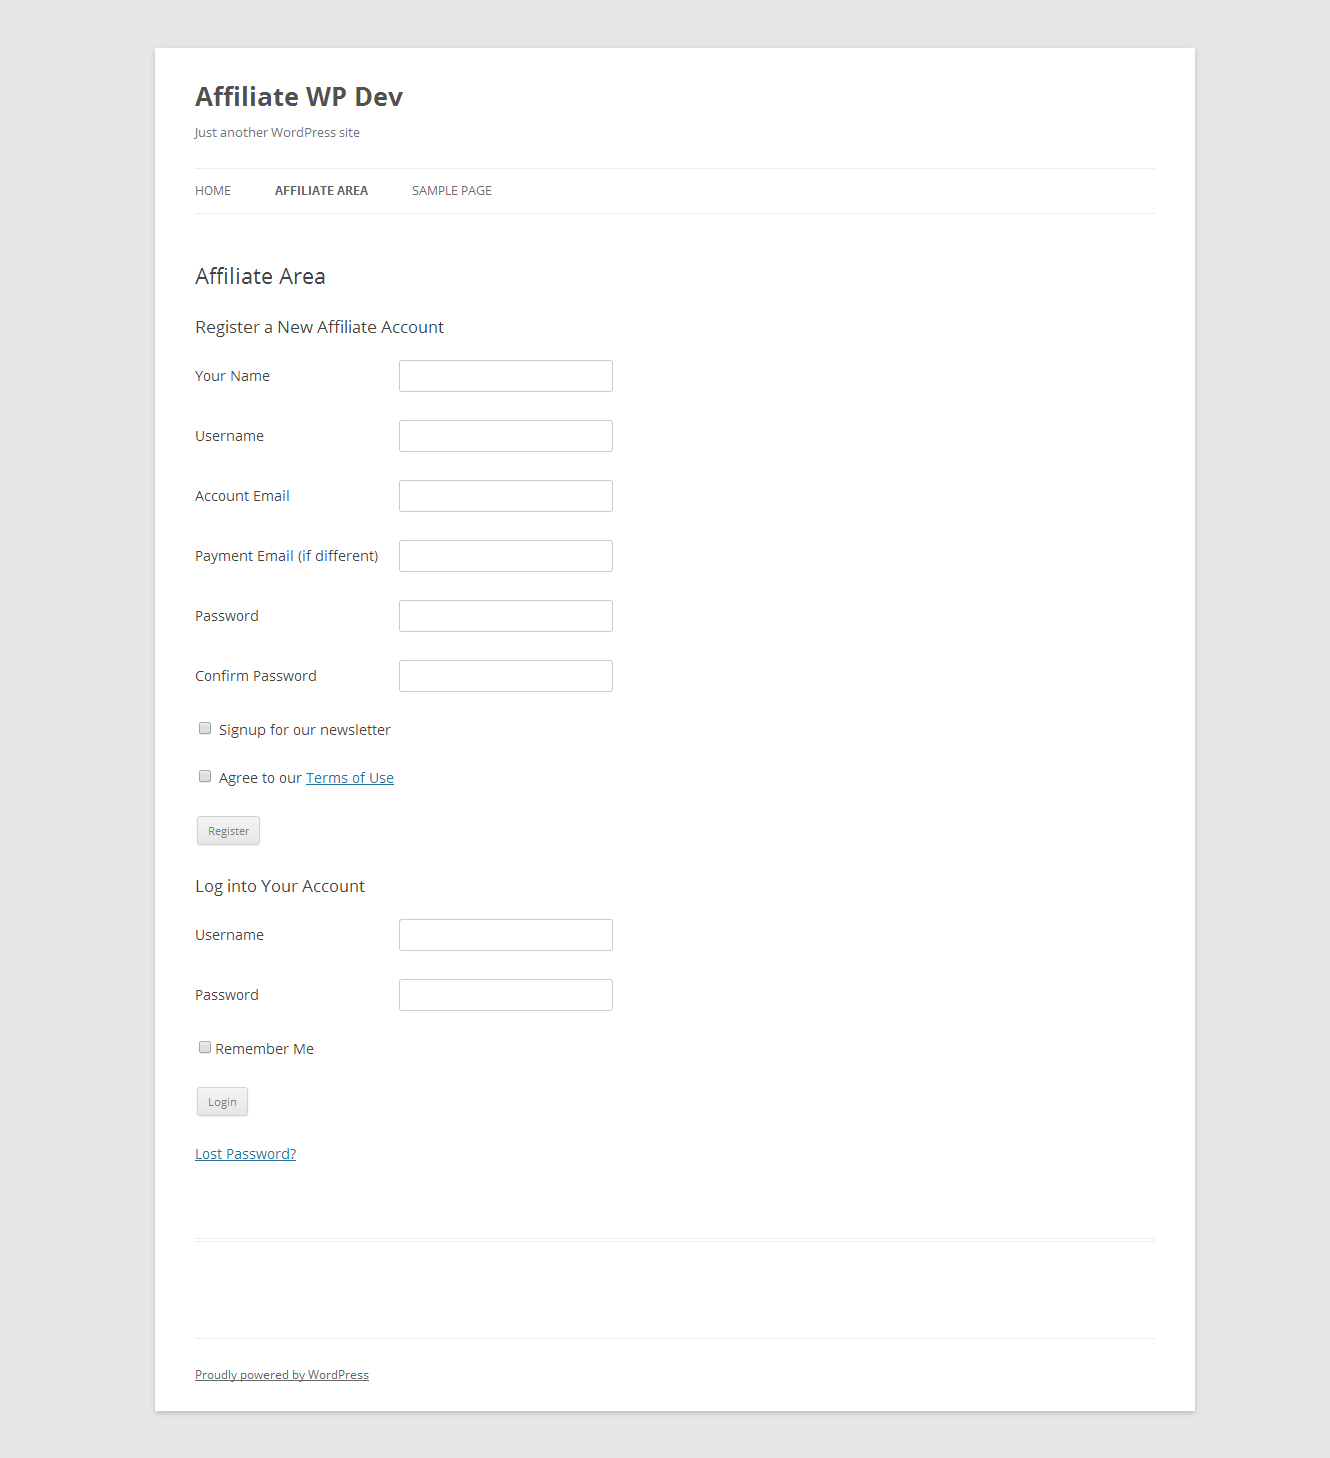 Newsletter Subscription checkbox on the Affiliate Registration Page